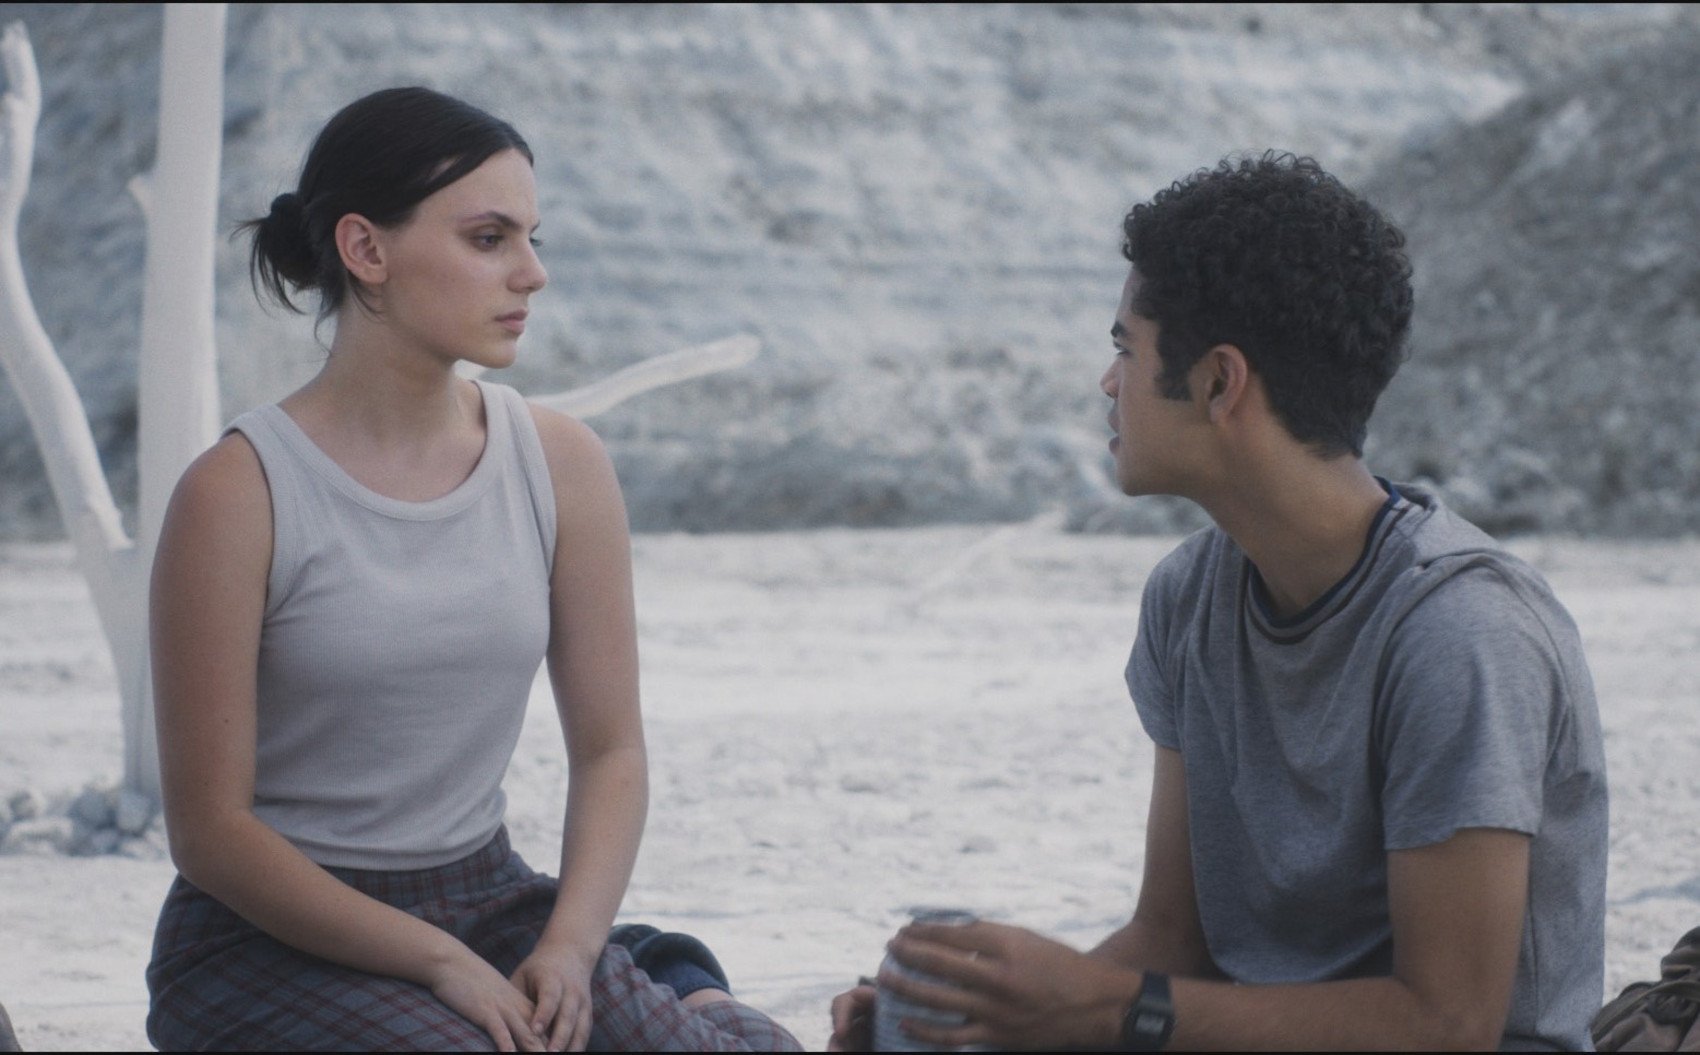 Dafne Keen and Amir Wilson as Lyra and Will in 'His Dark Materials' Season 3, Episode 3. They're sitting on sand and staring at one another.